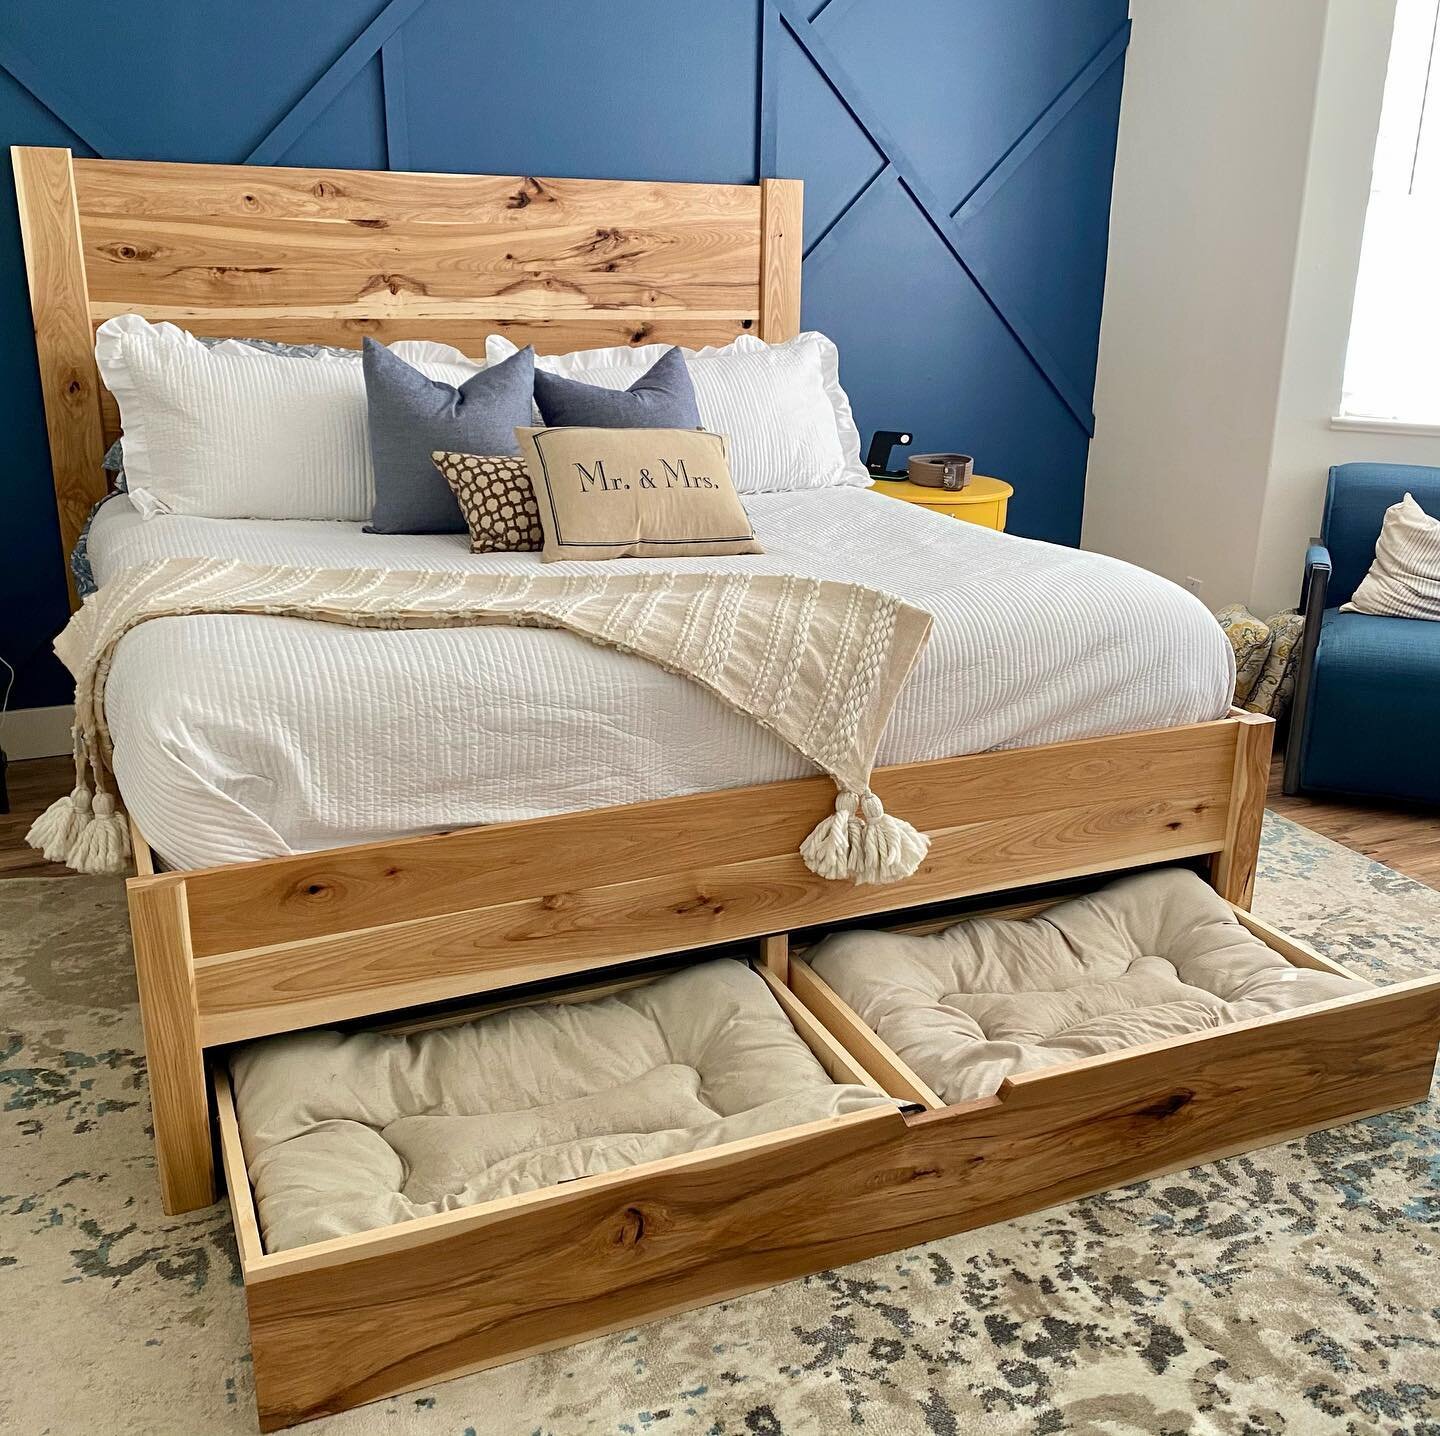 What do you think?! Have you checked out the video yet?! Full bed + storage build is up! Link in bio! And stories! #MullenTheMaker
&mdash;
#woodworkers #woodworking #woodwork #woodworker #wood #woodshop #woodworkersofinstagram #woodworkingcommunity #